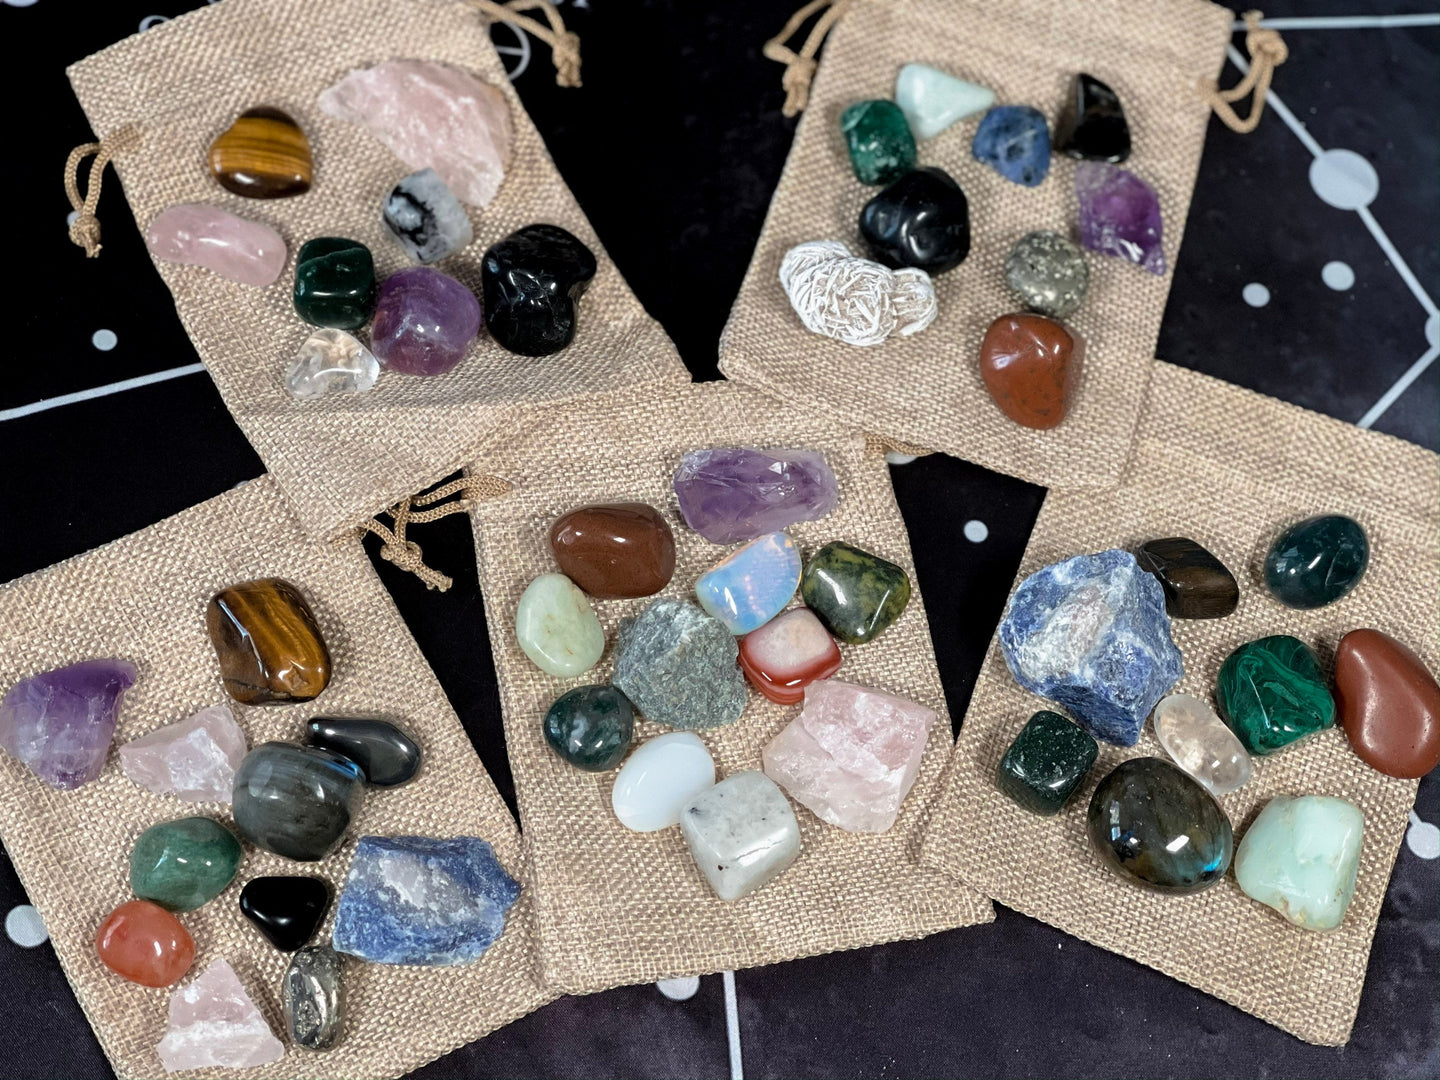 Crystals Mystery Bag, Crystals Mystery Box, Mystery Crystal Grab Bag, 10-15 Crystals in each Bag, Mystery Crystal Package